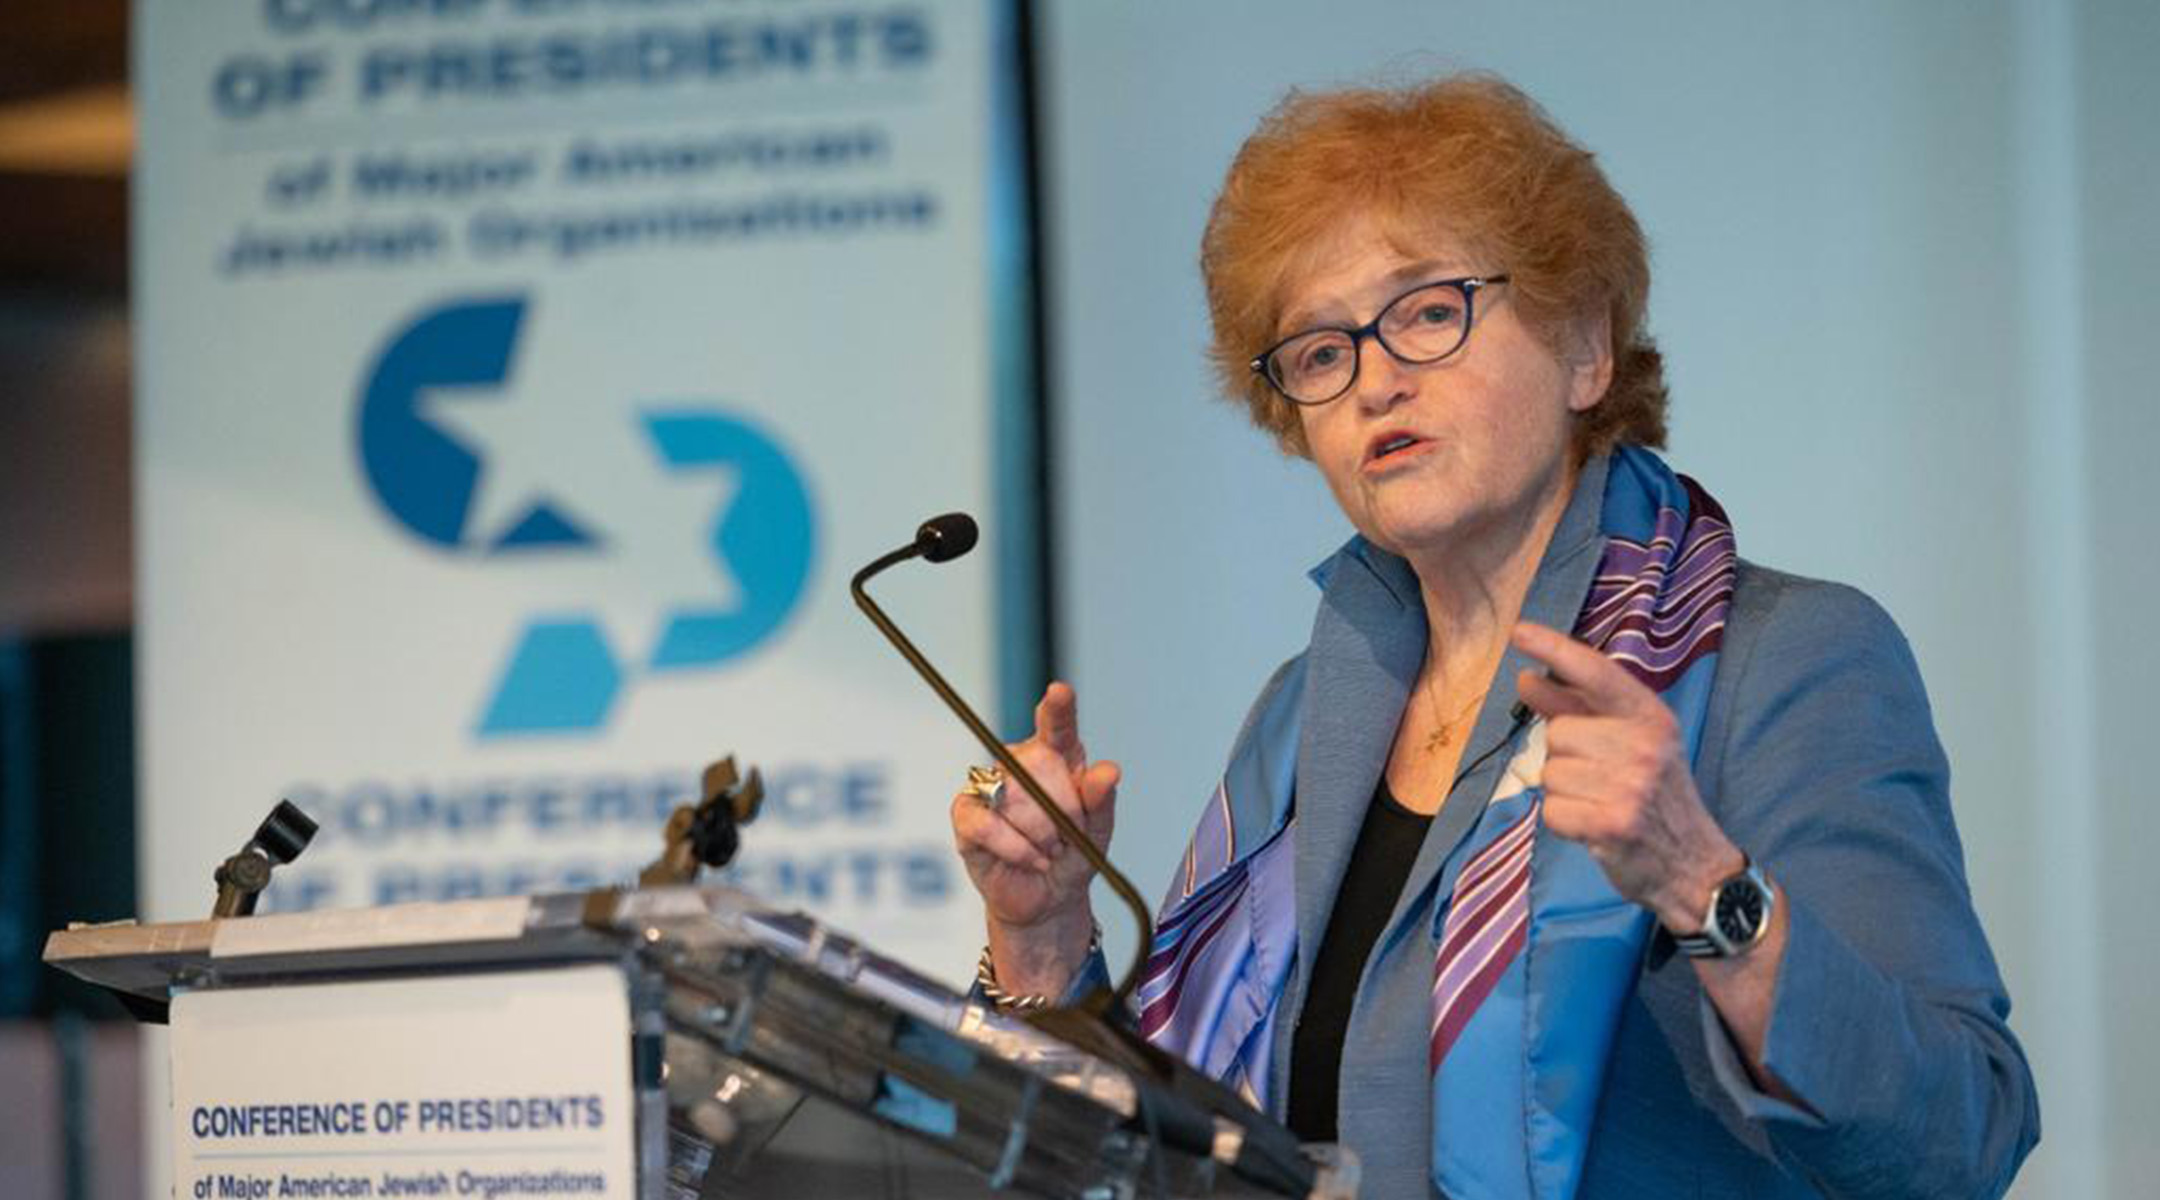 Ambassador Deborah Lipstadt speaks at a conference arranged by the Conference of Presidents of Major American Jewish Organizations at the Museum of Jewish Heritage in Manhattan in 2021.